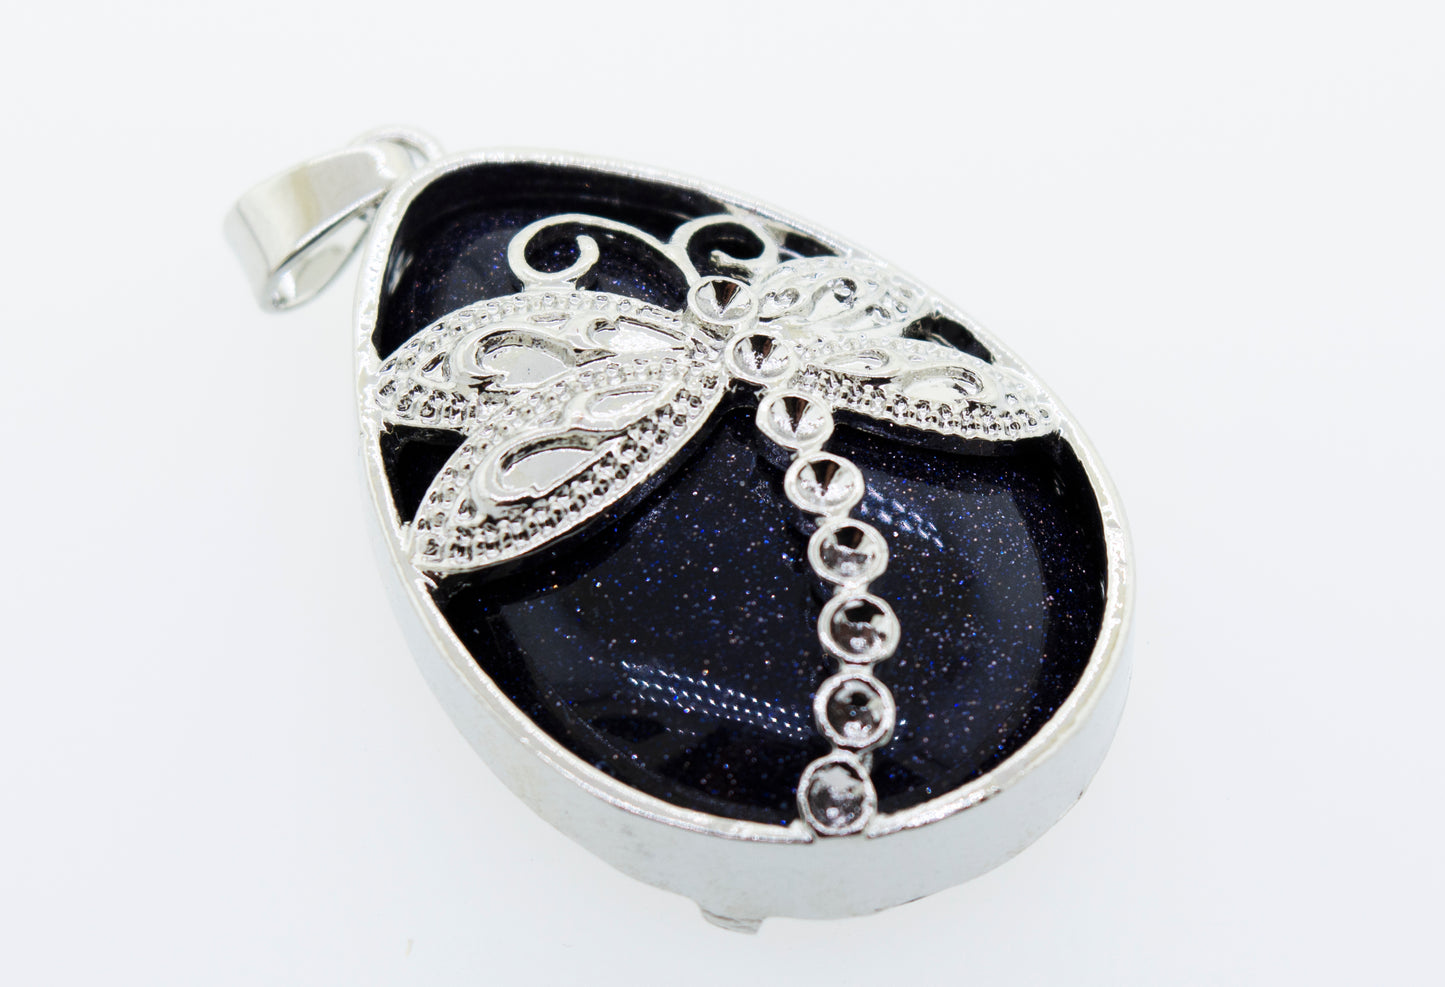 A Super Silver Teardrop Stone pendant with a dragonfly adorned with a teardrop shaped black stone.